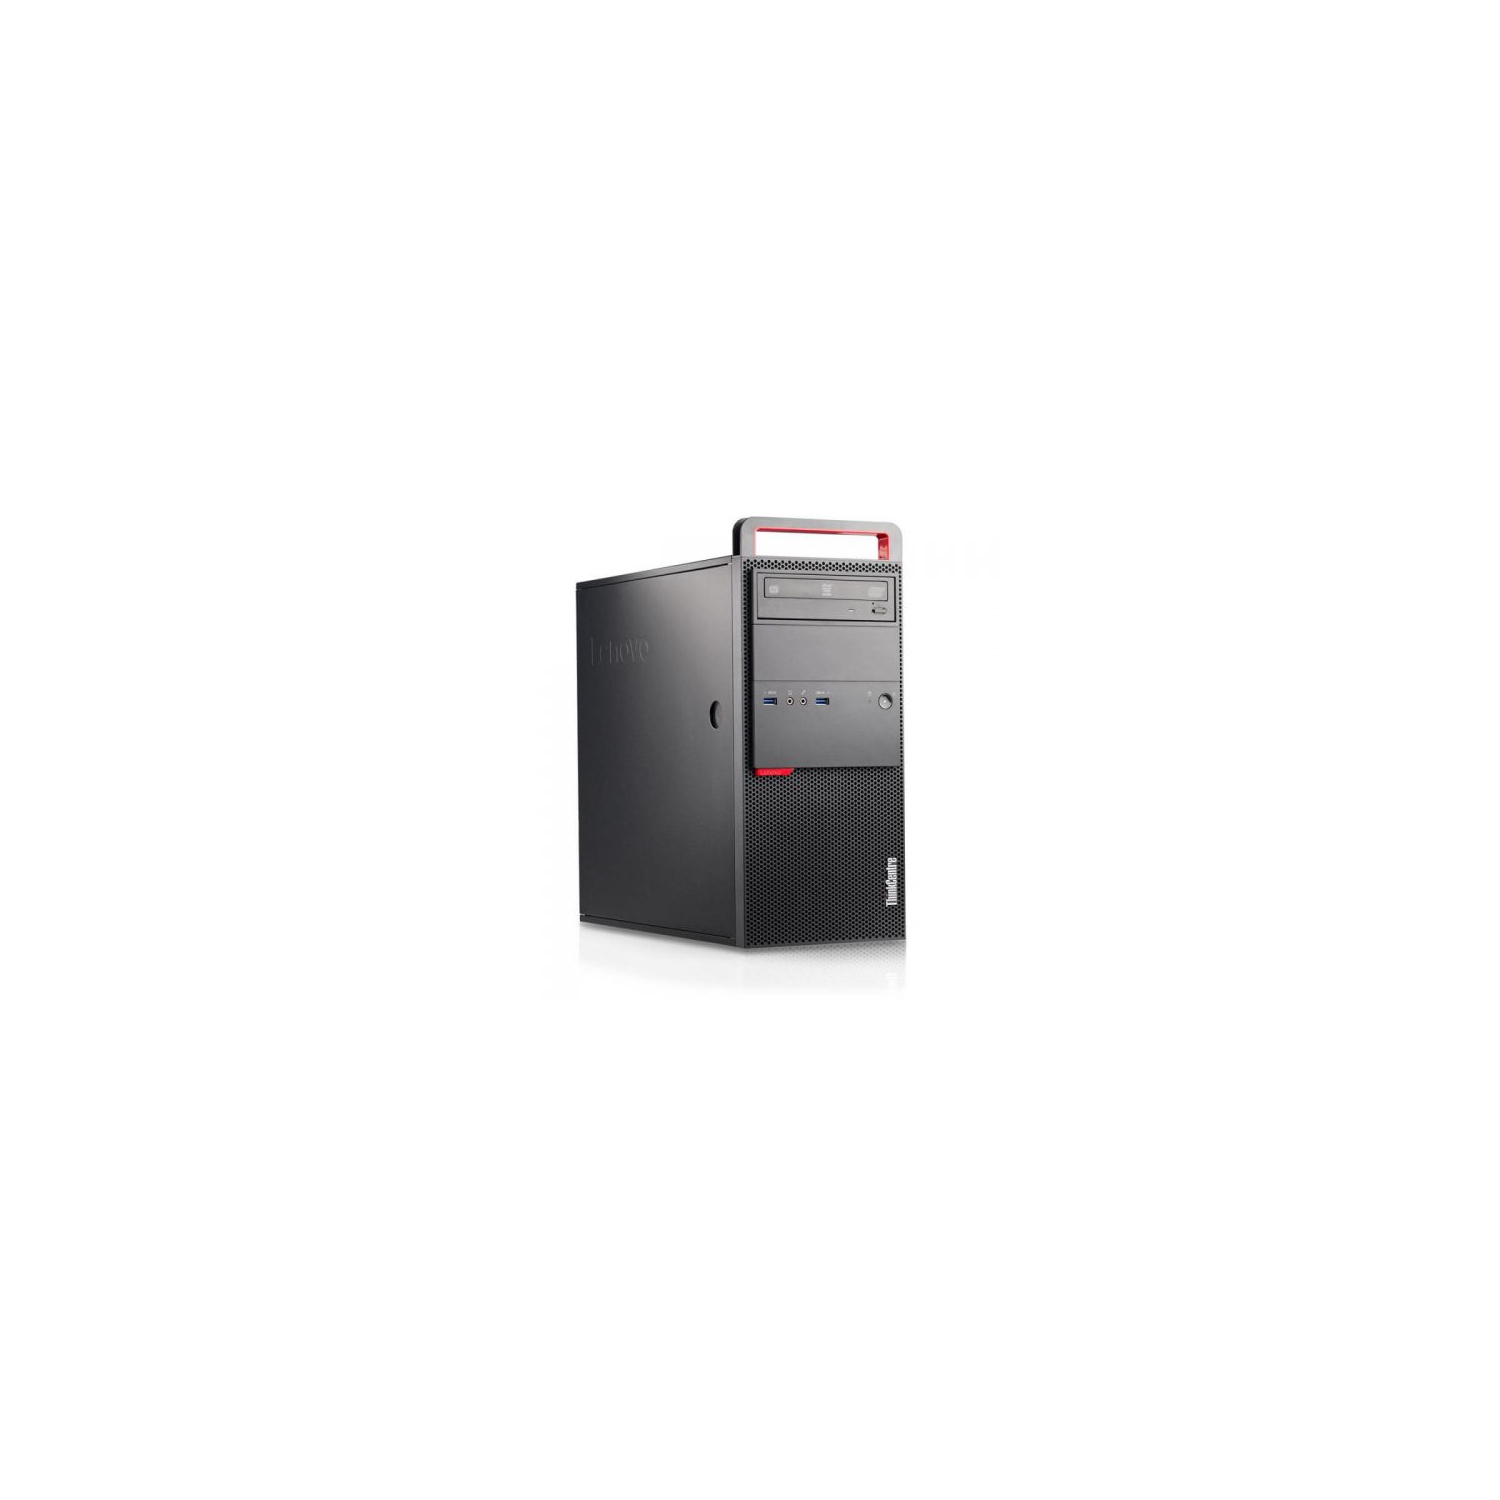 Refurbished (Good) - Gaming Lenovo ThinkCentre M900 Tower Desktop PC Intel Core i5 6th Gen 16GB 256GB SSD Windows 10 Pro,New GT1030 2g, New Keyboard, Mouse, WiFi Adapter